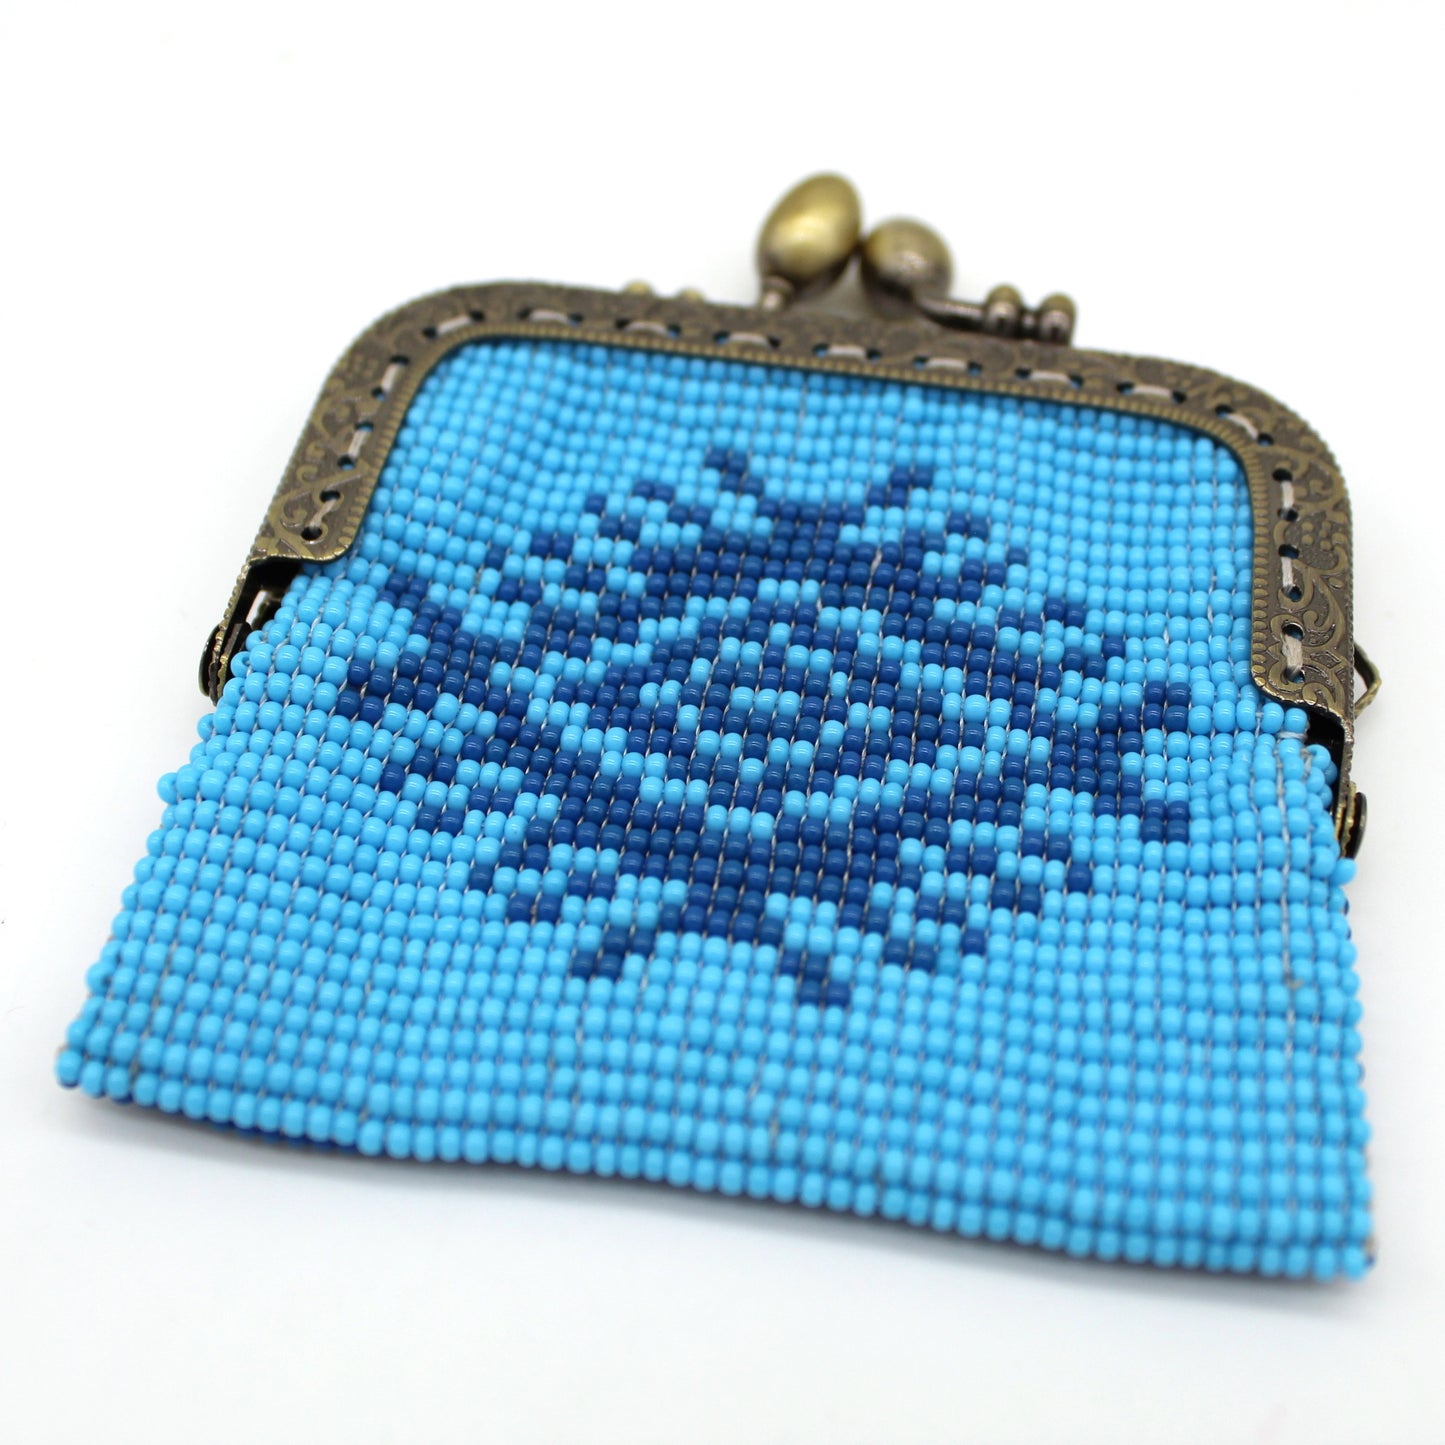 Glass bead coin purse with metal frame - Blue Eye